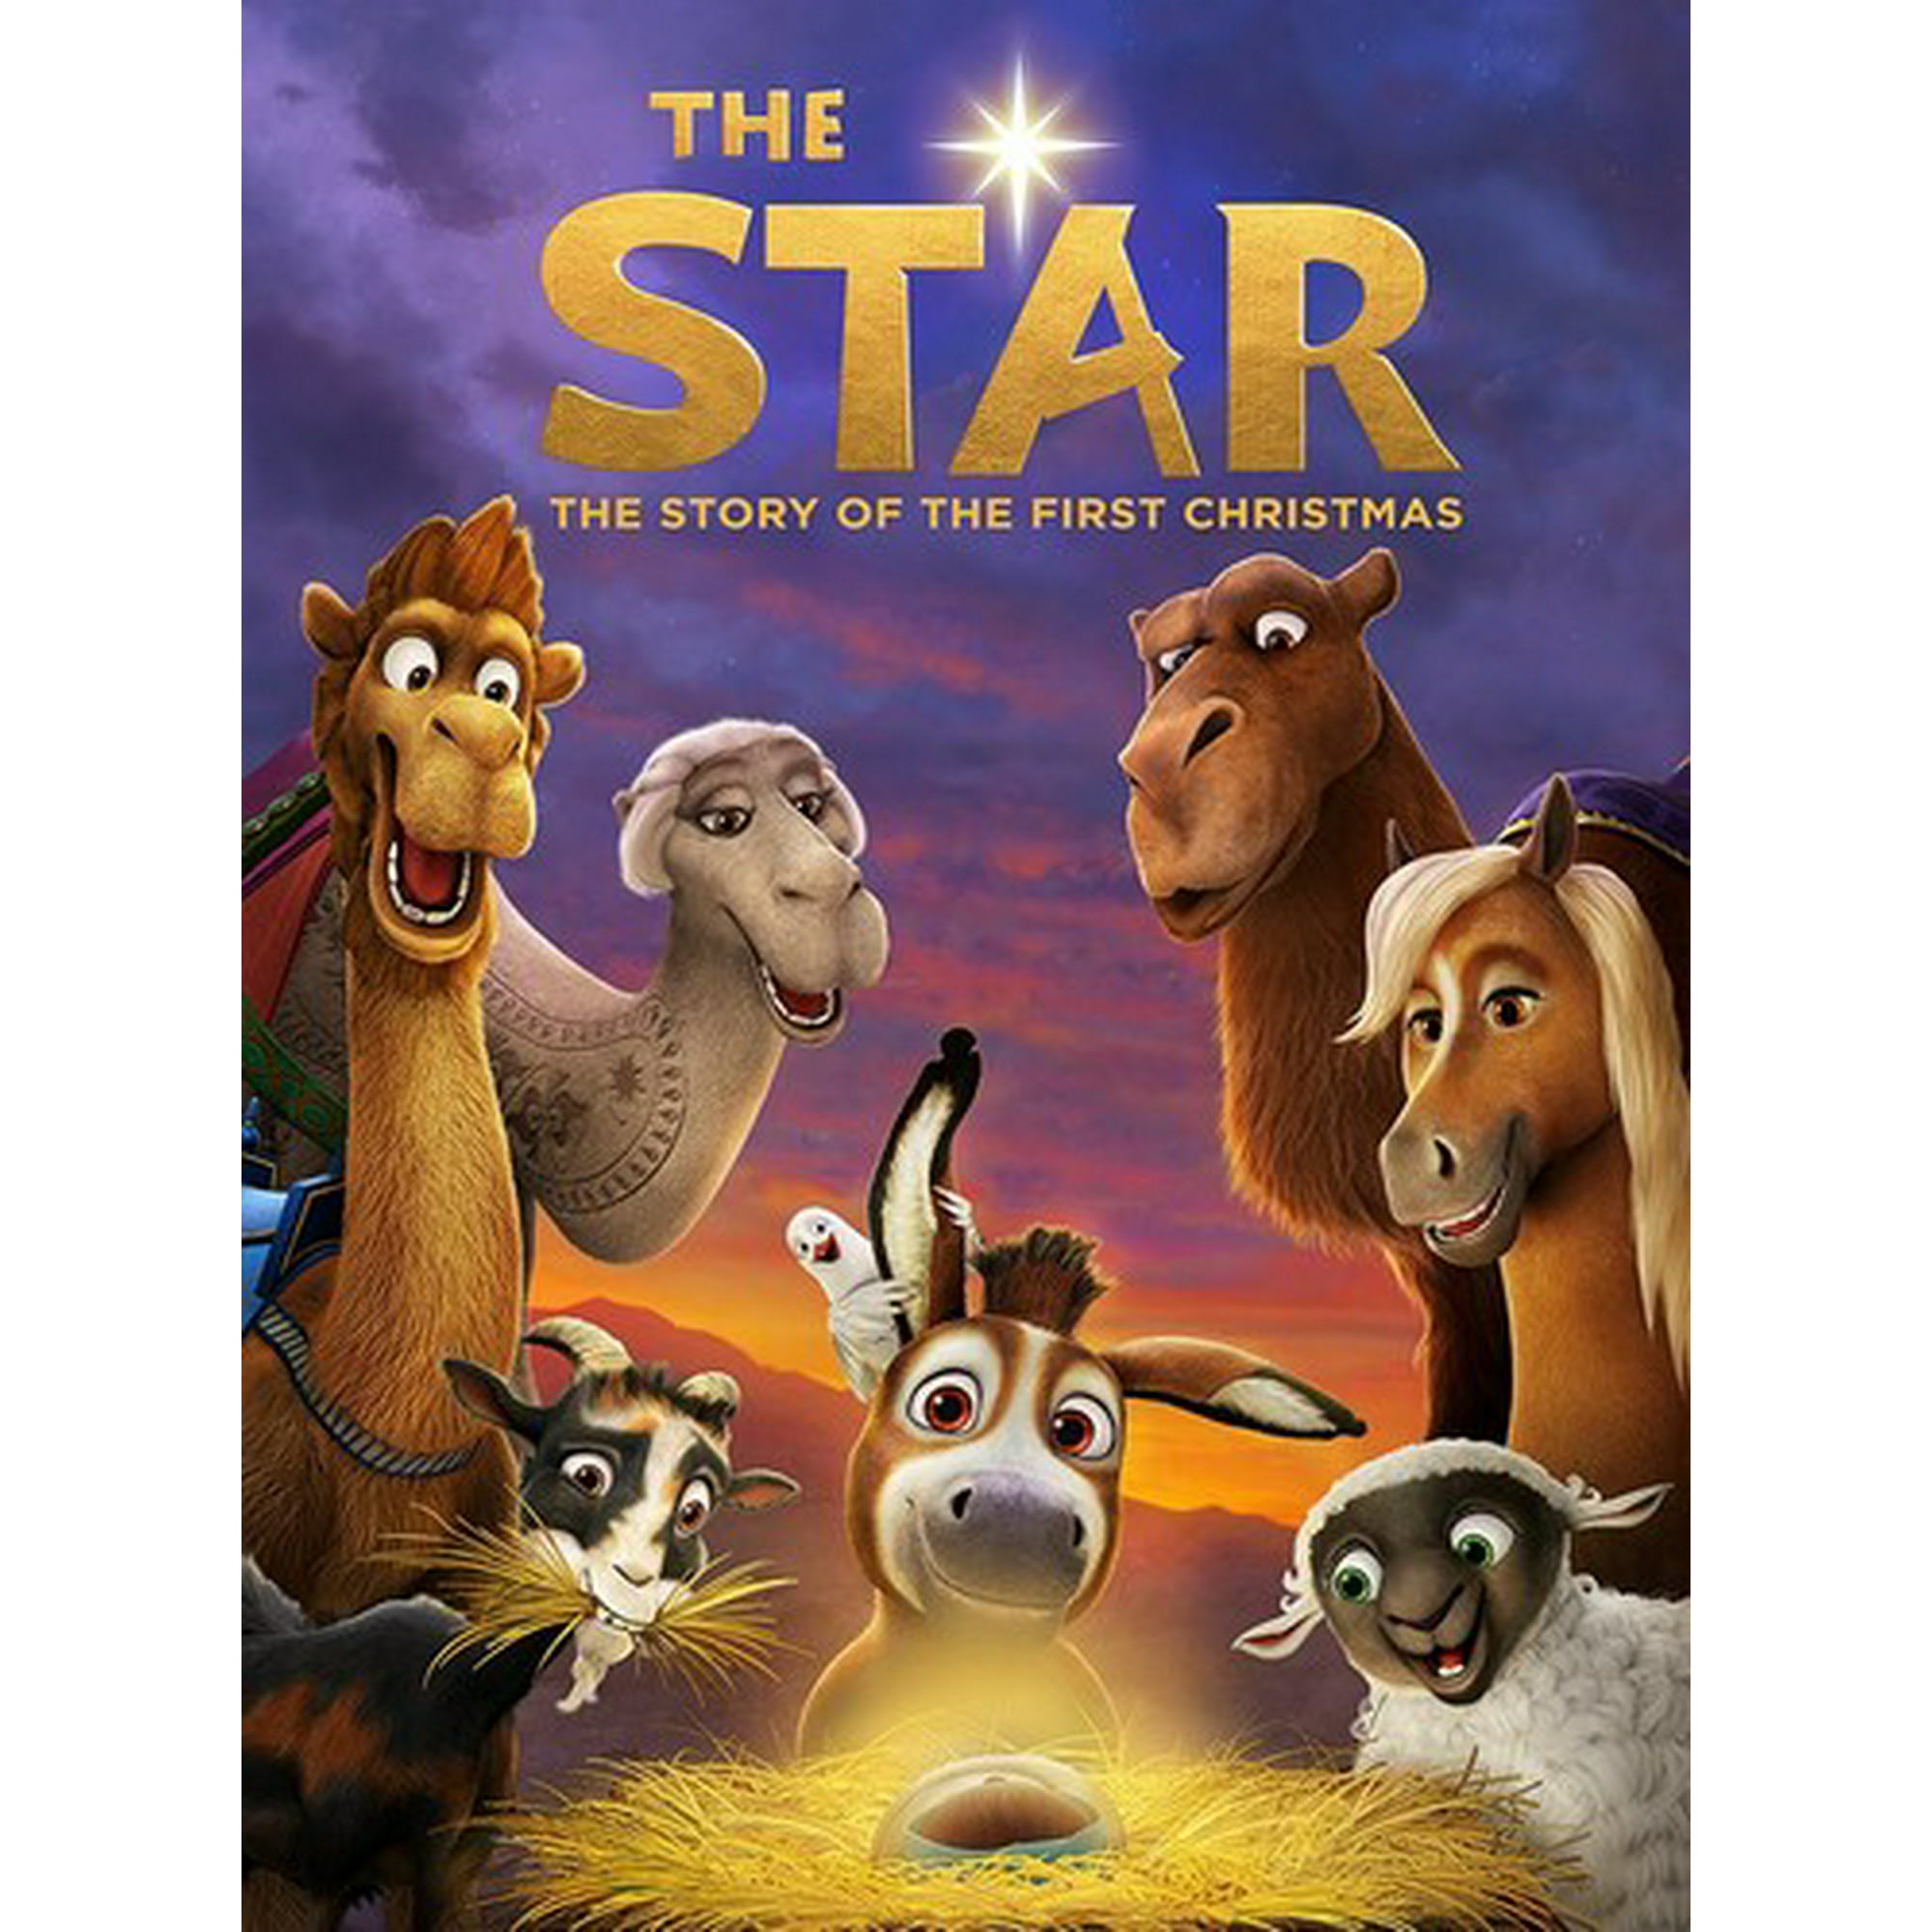 The Star [BLU-RAY] With DVD, Widescreen, 2 Pack, Ac-3/Dolby Digital, Dolby,  Dubbed, Subtitled | Walmart Canada